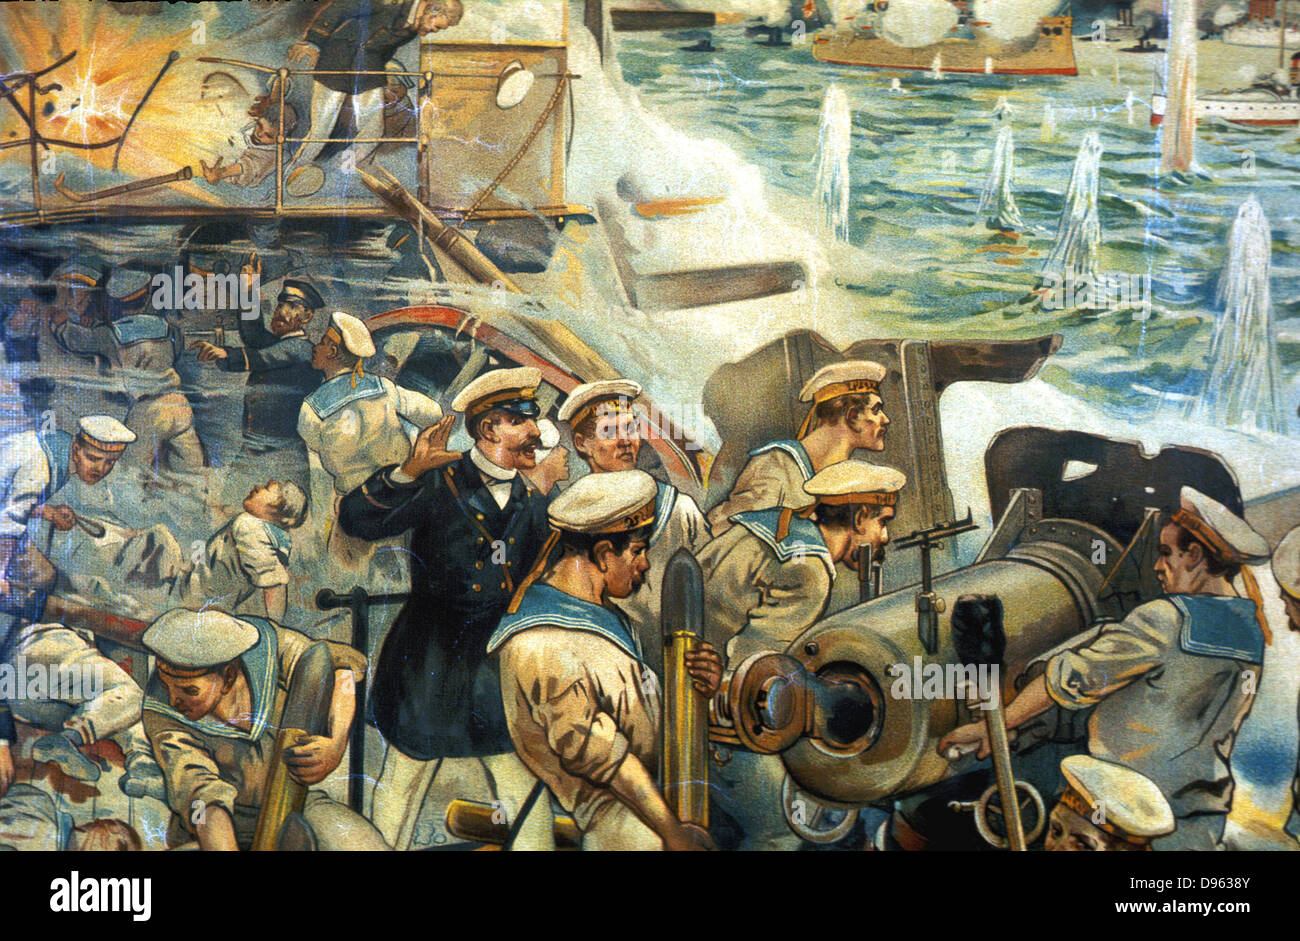 Russo-Japanese War 1904-1905: Naval battle between Russian and Japanese fleets off Port Arthur, 10 August 1904. Scene on Russian flagship 'Tsarevich'  during the engagement showing gun being loaded. From contemporary German chromolithograph. Stock Photo